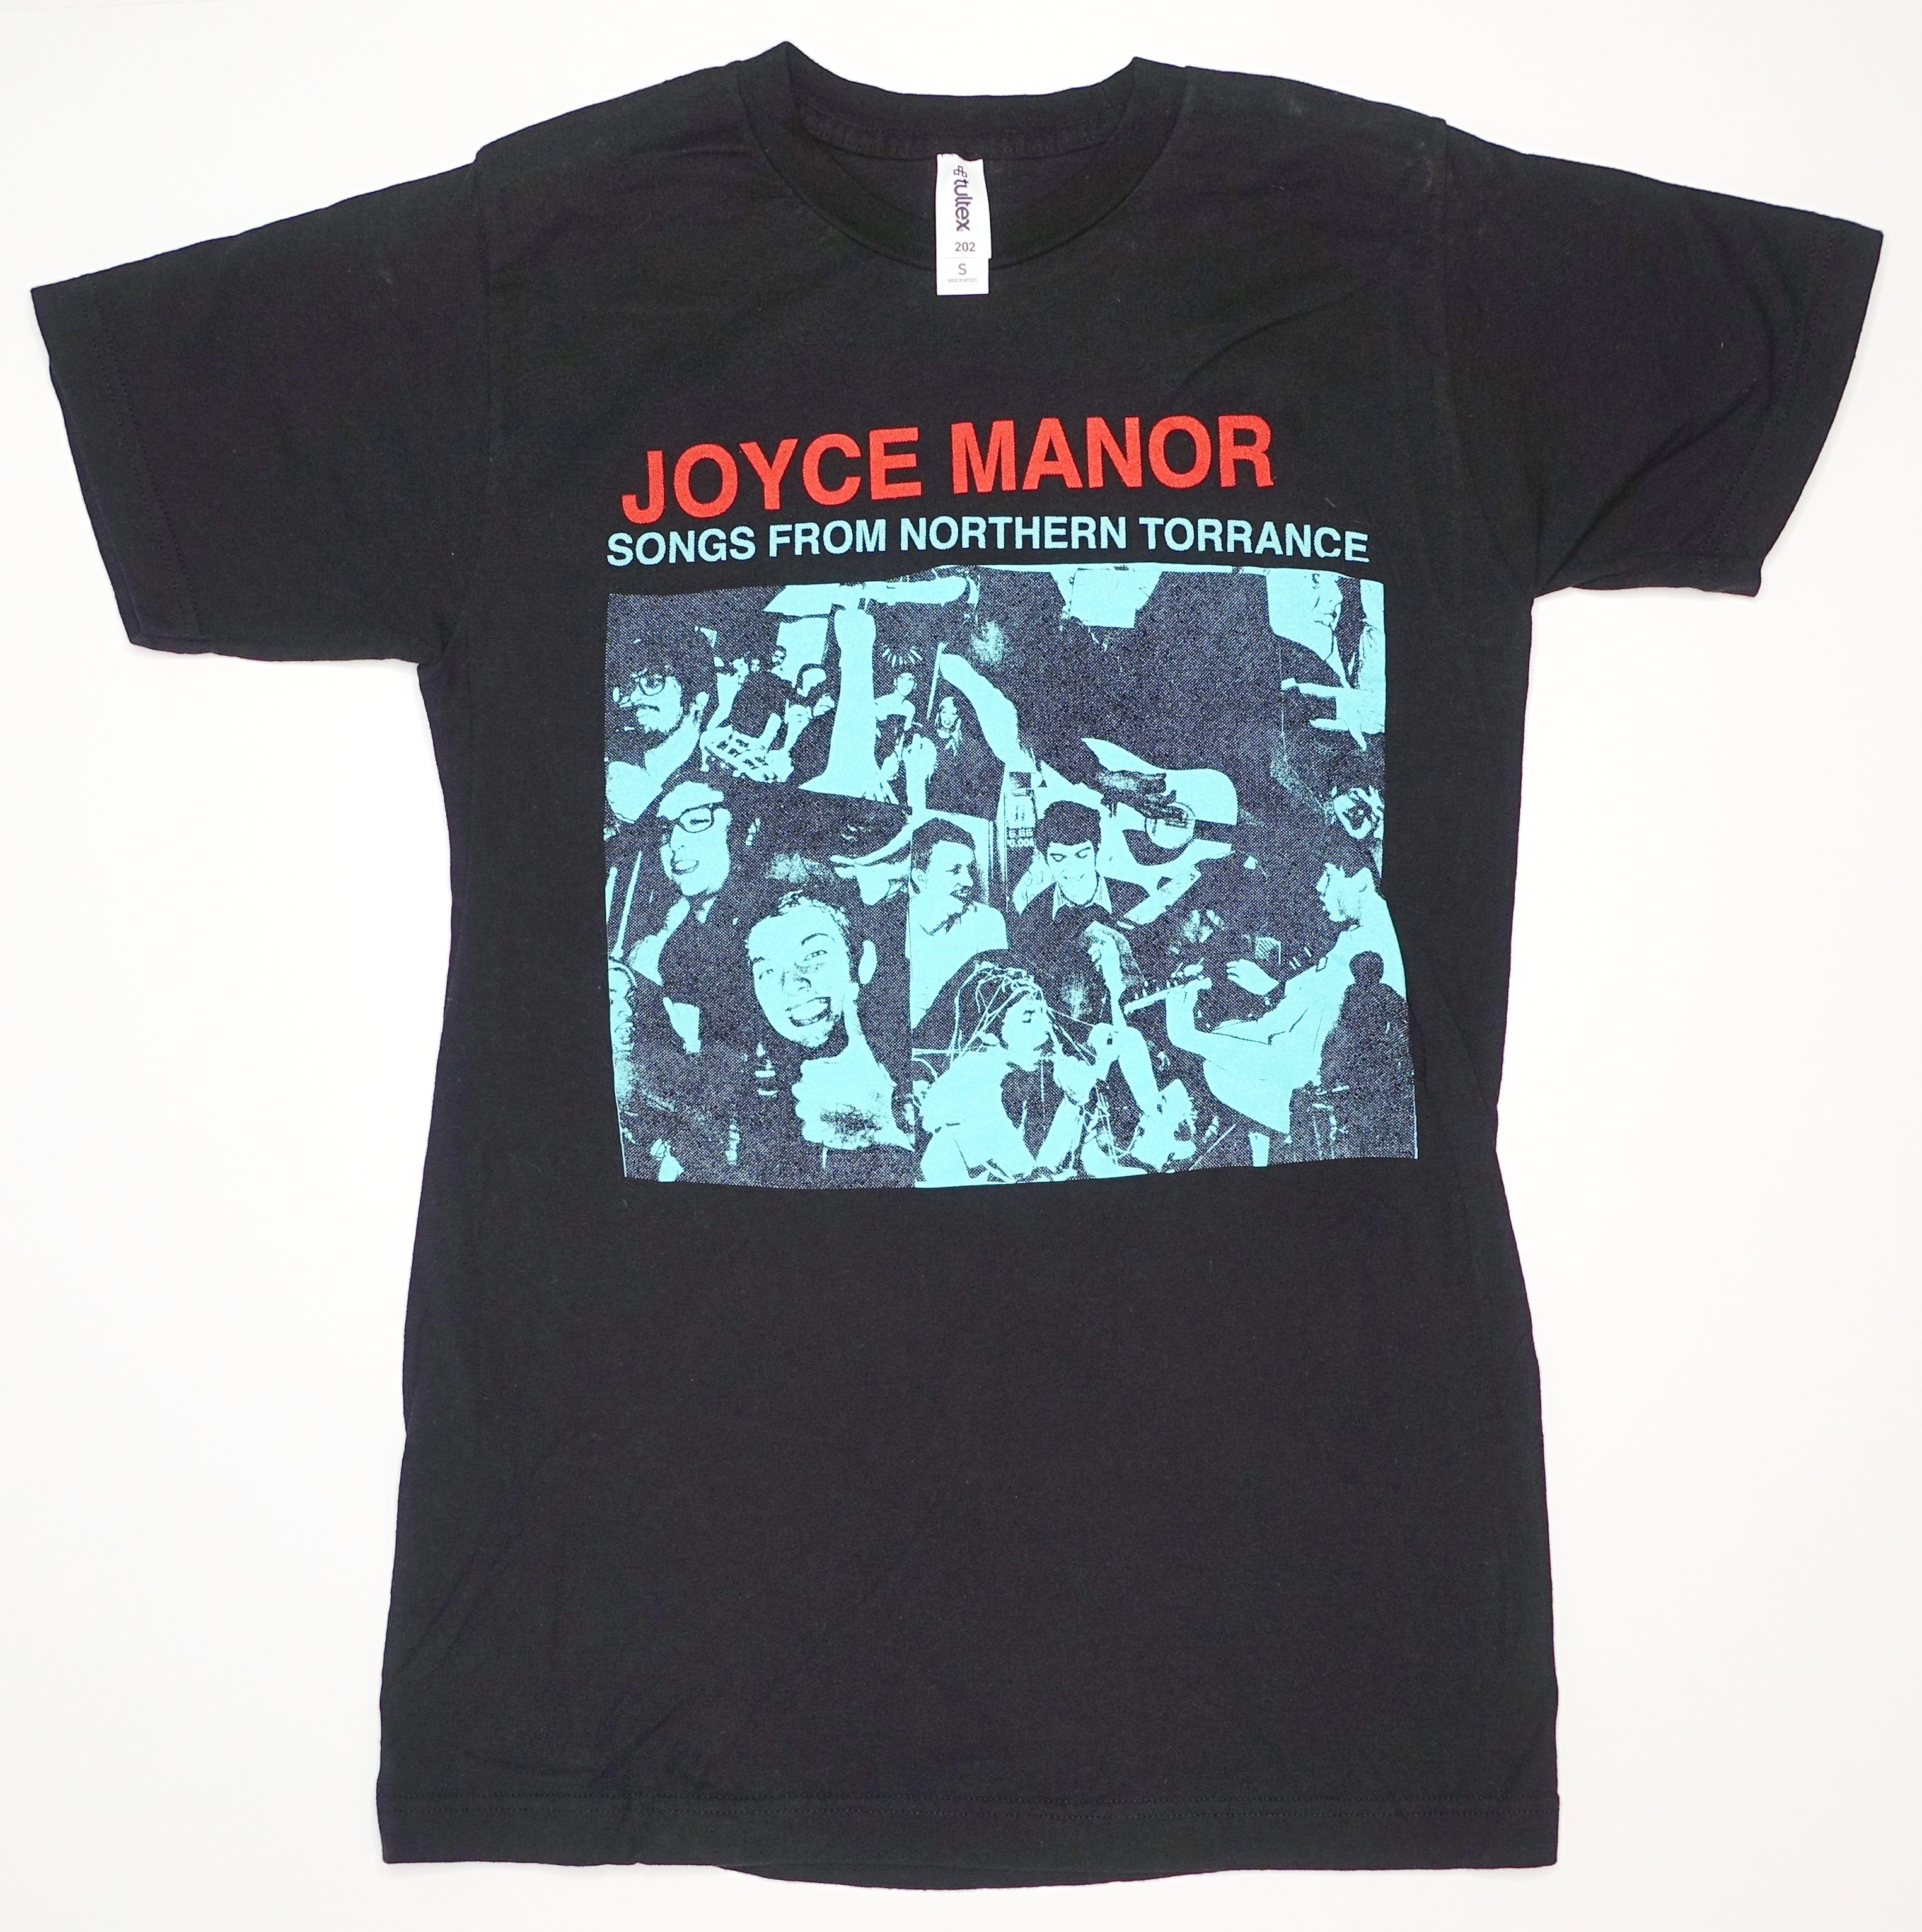 Joyce Manor – Songs From Northern Torrence 2020 Shirt Size Small